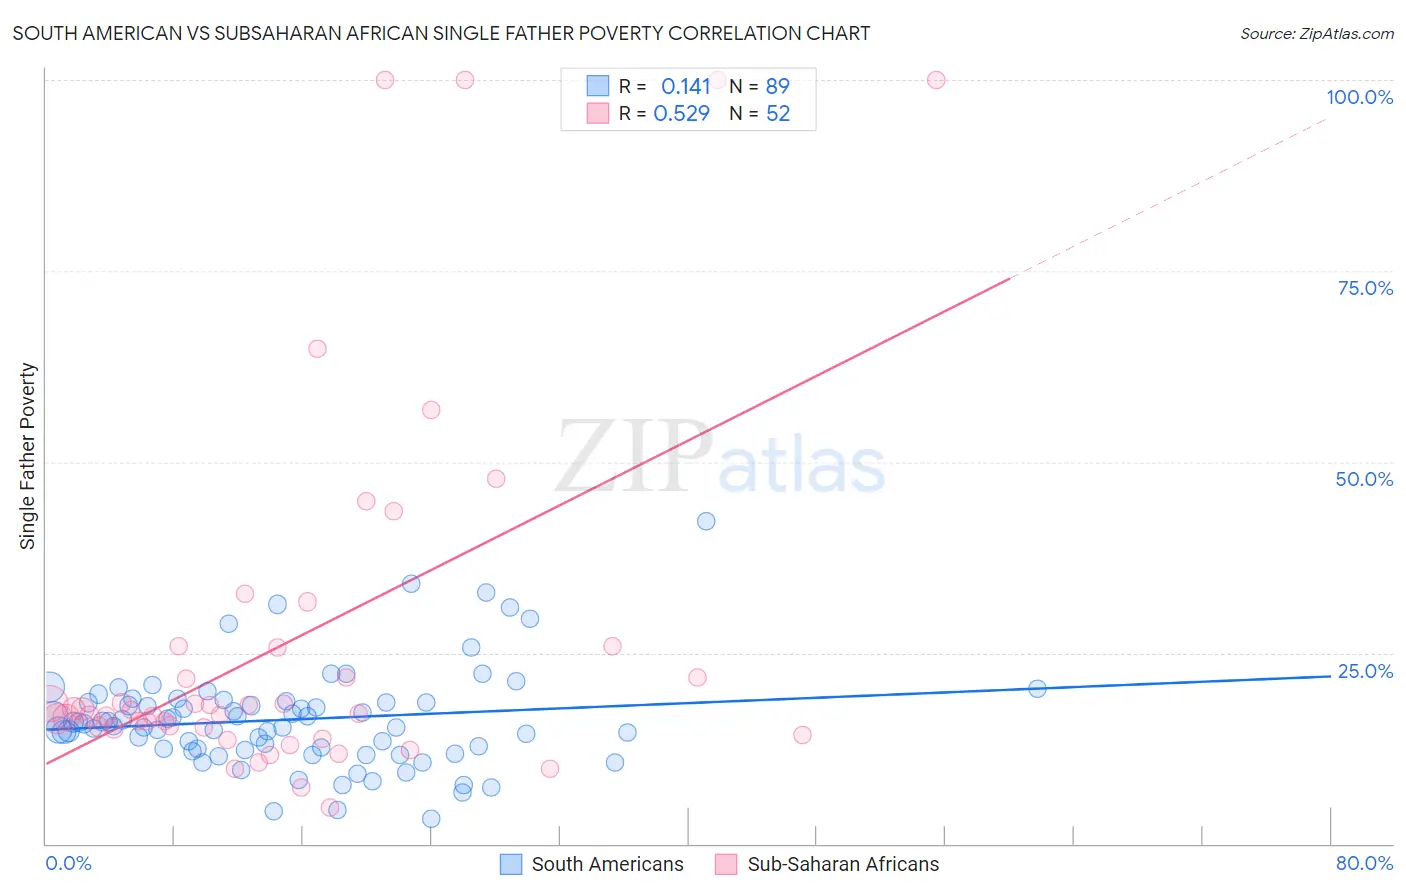 South American vs Subsaharan African Single Father Poverty